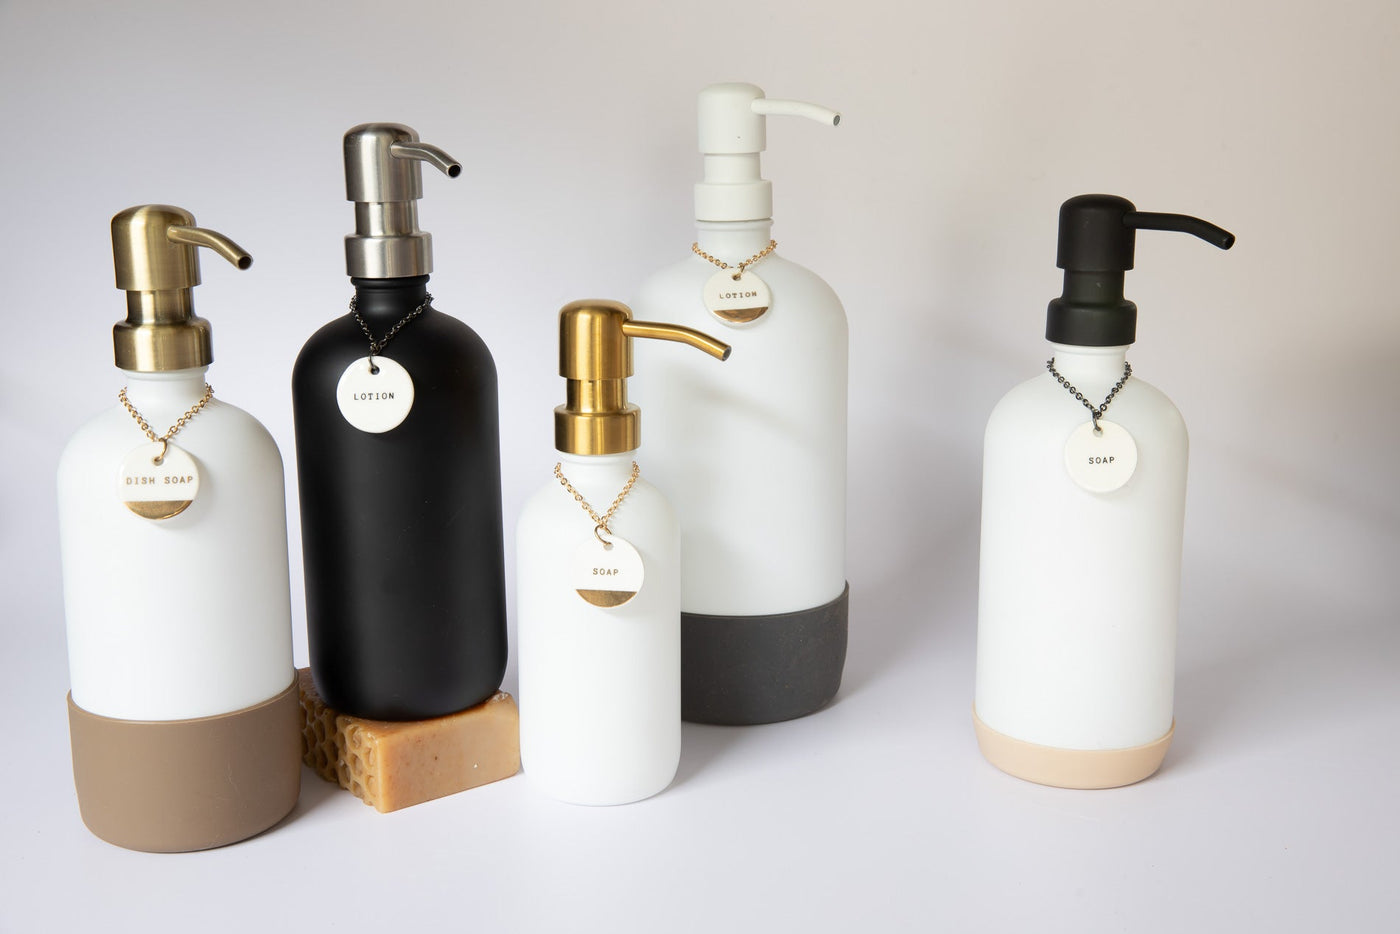 SALE | Glass Bottle | Avery Collection - FINAL SALE